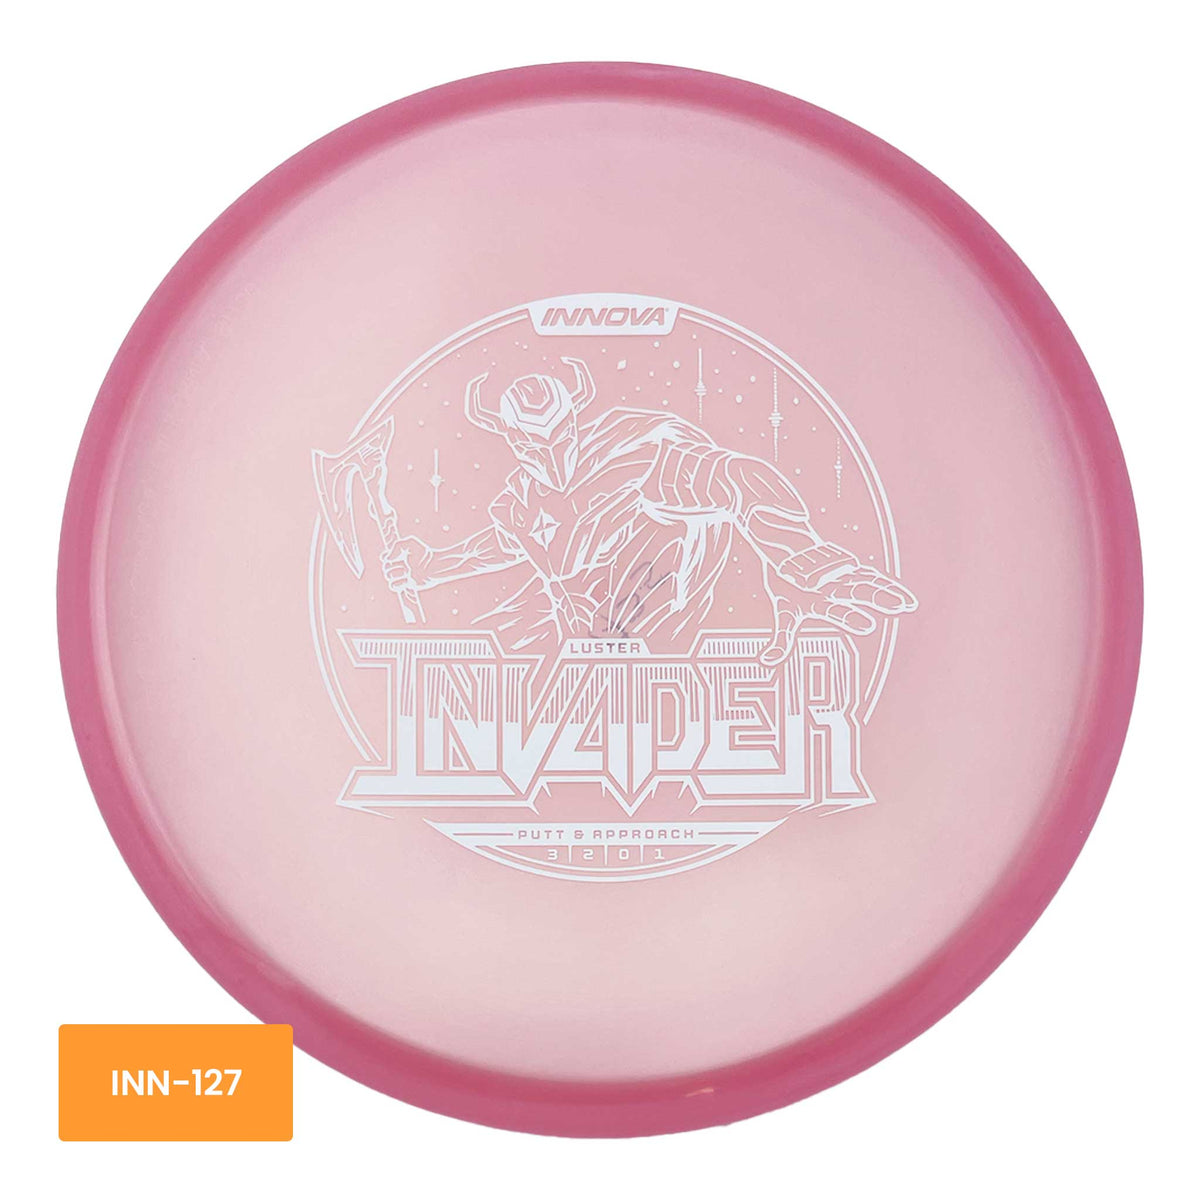 Innova Disc Golf Luster Invader putter and approach - Pink